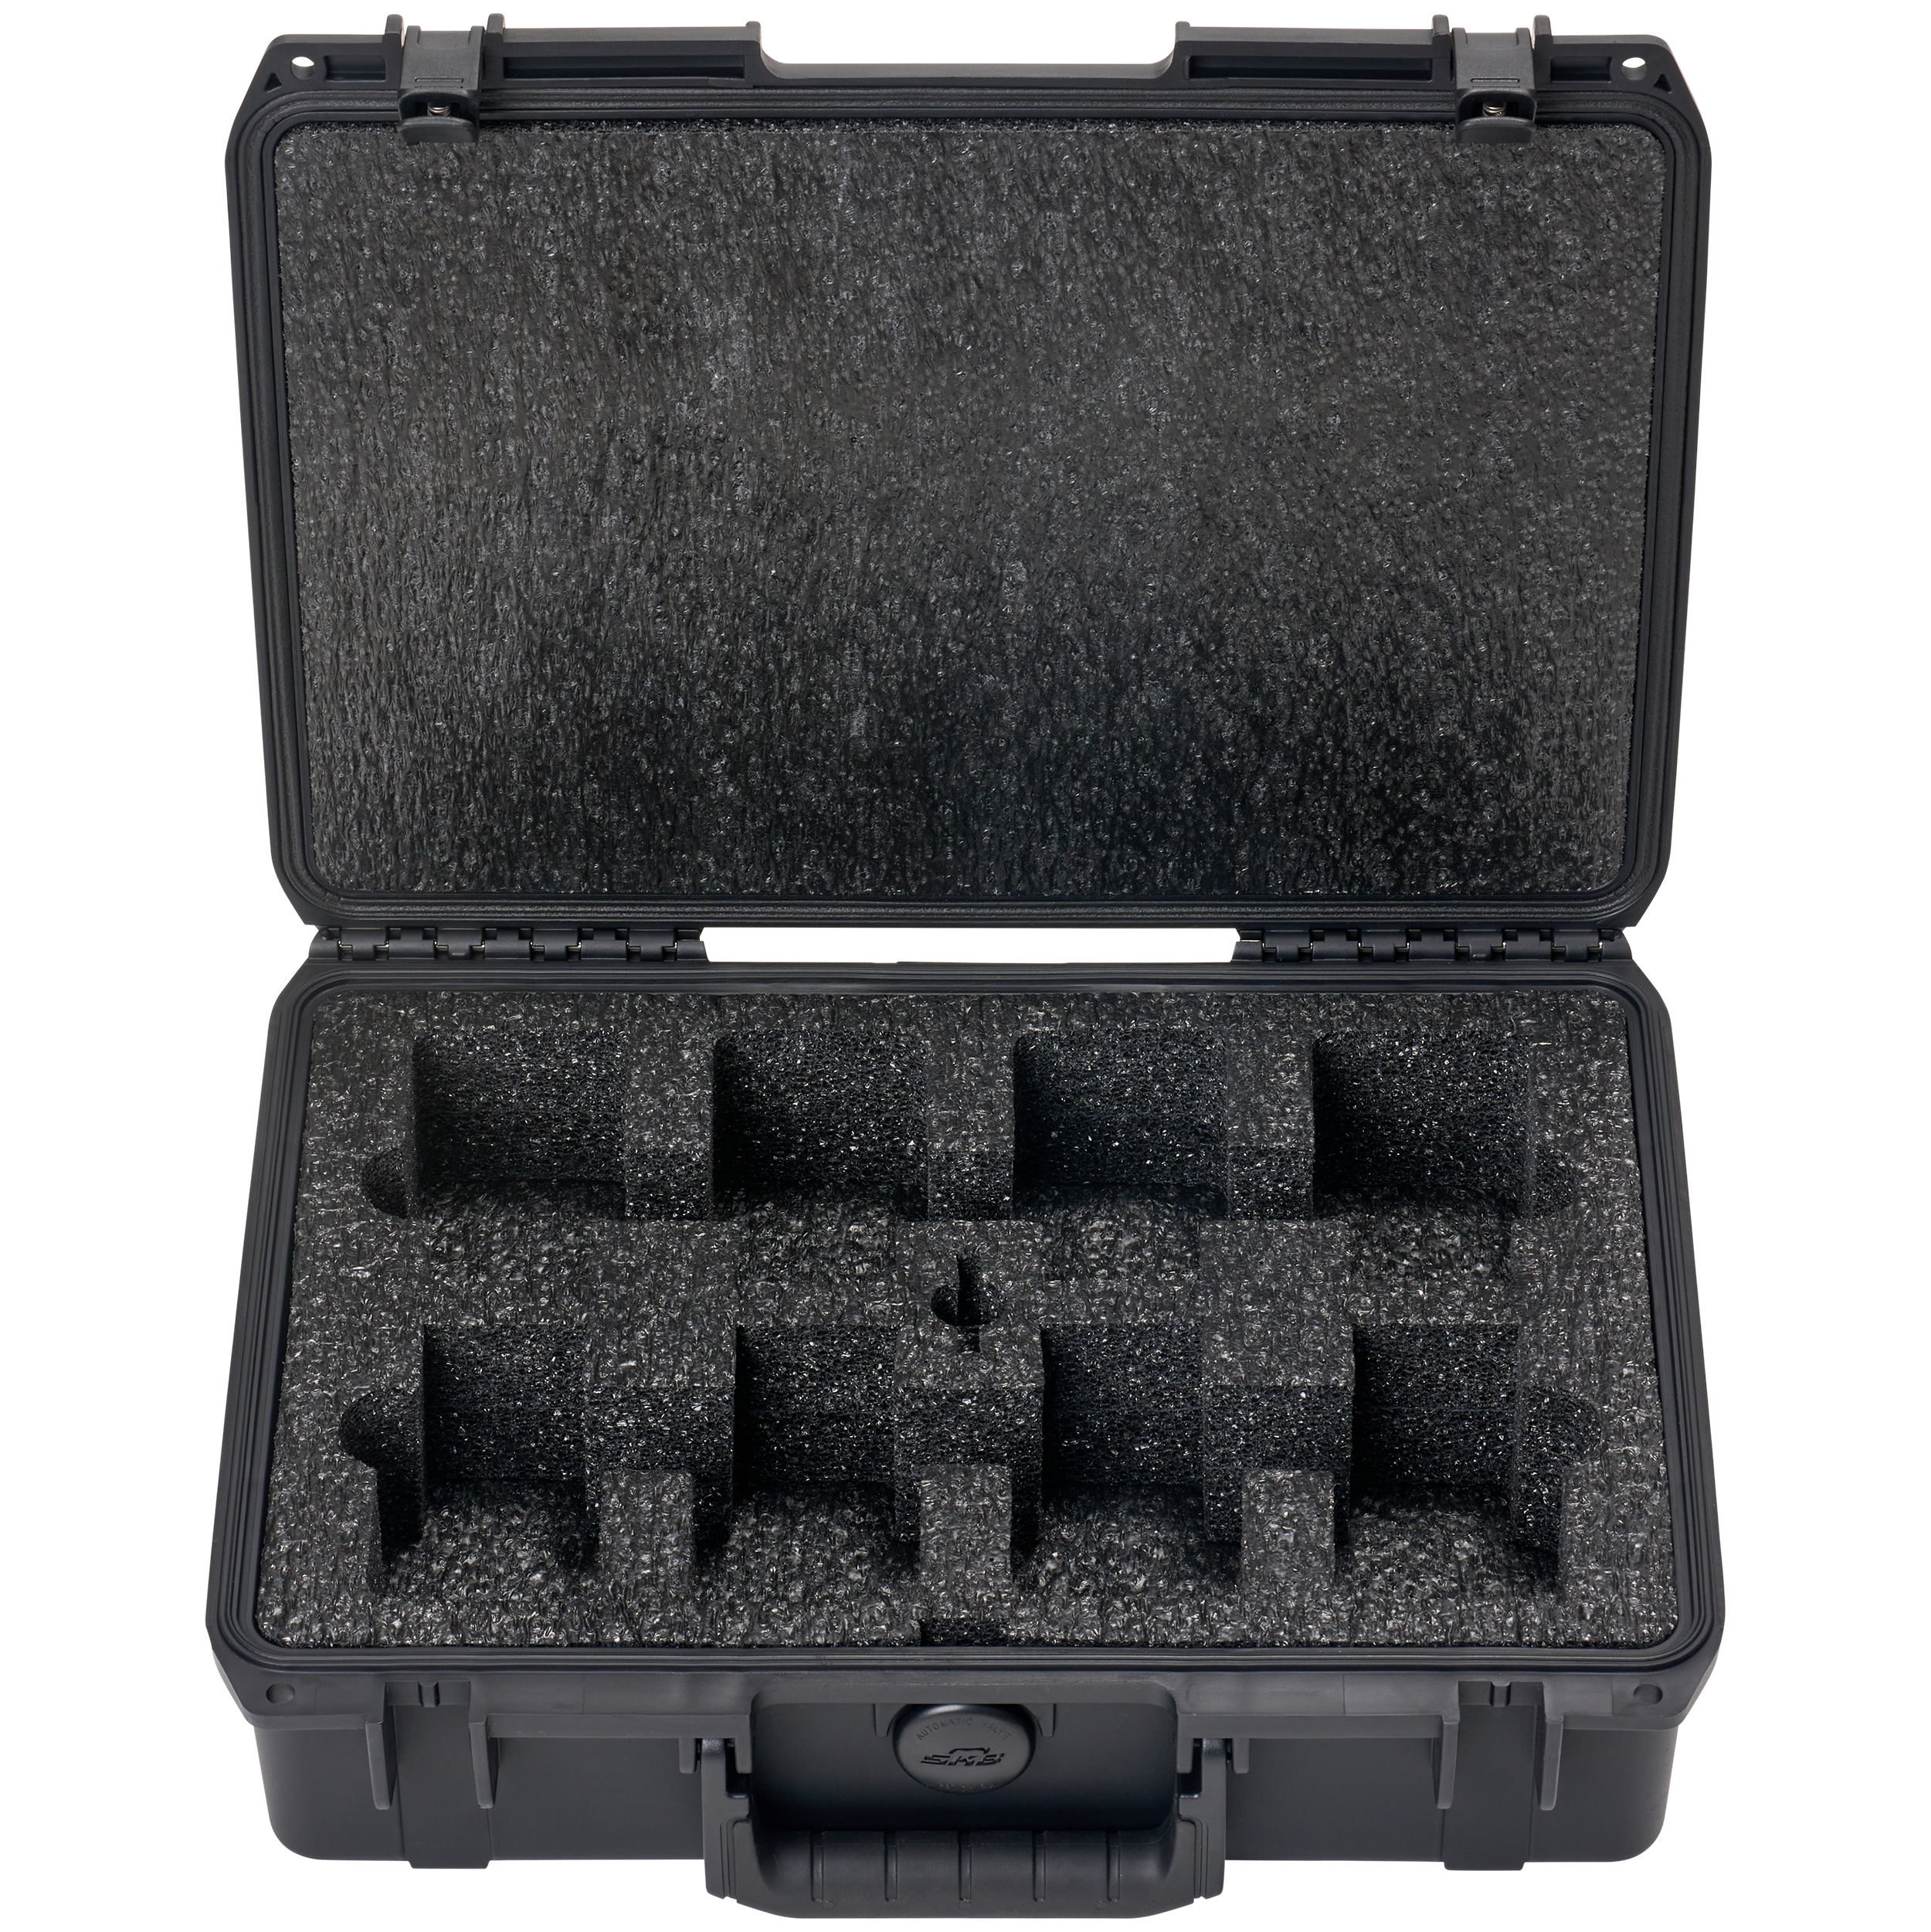 BYFP ipCase for 8x Wireless Handheld Transmitter Capsules